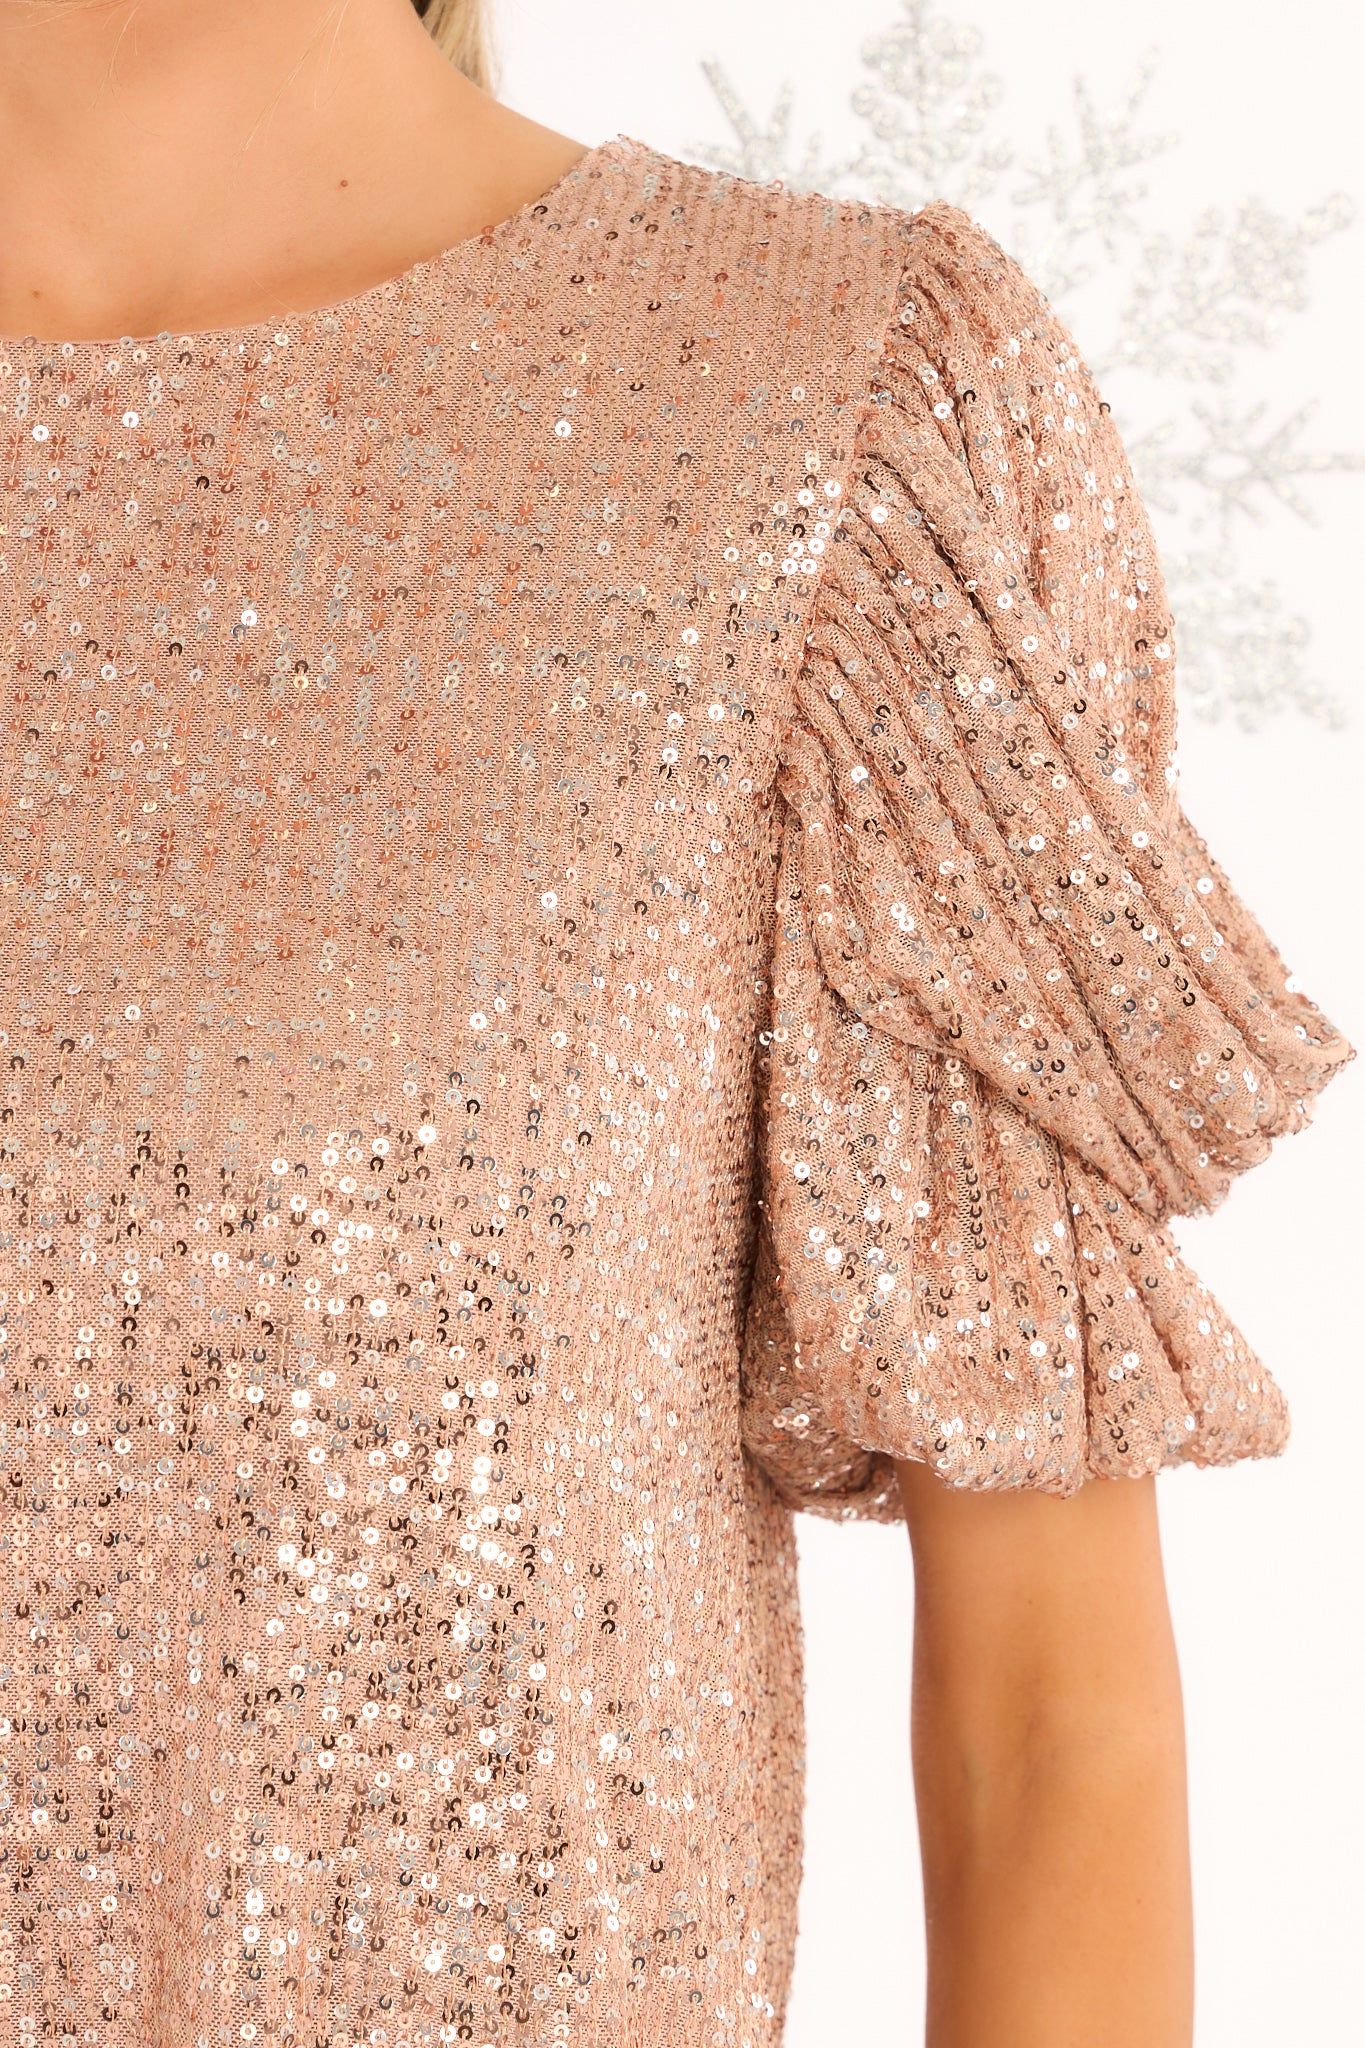 Shimmering Delight Champagne Sequin Top | Red Dress 